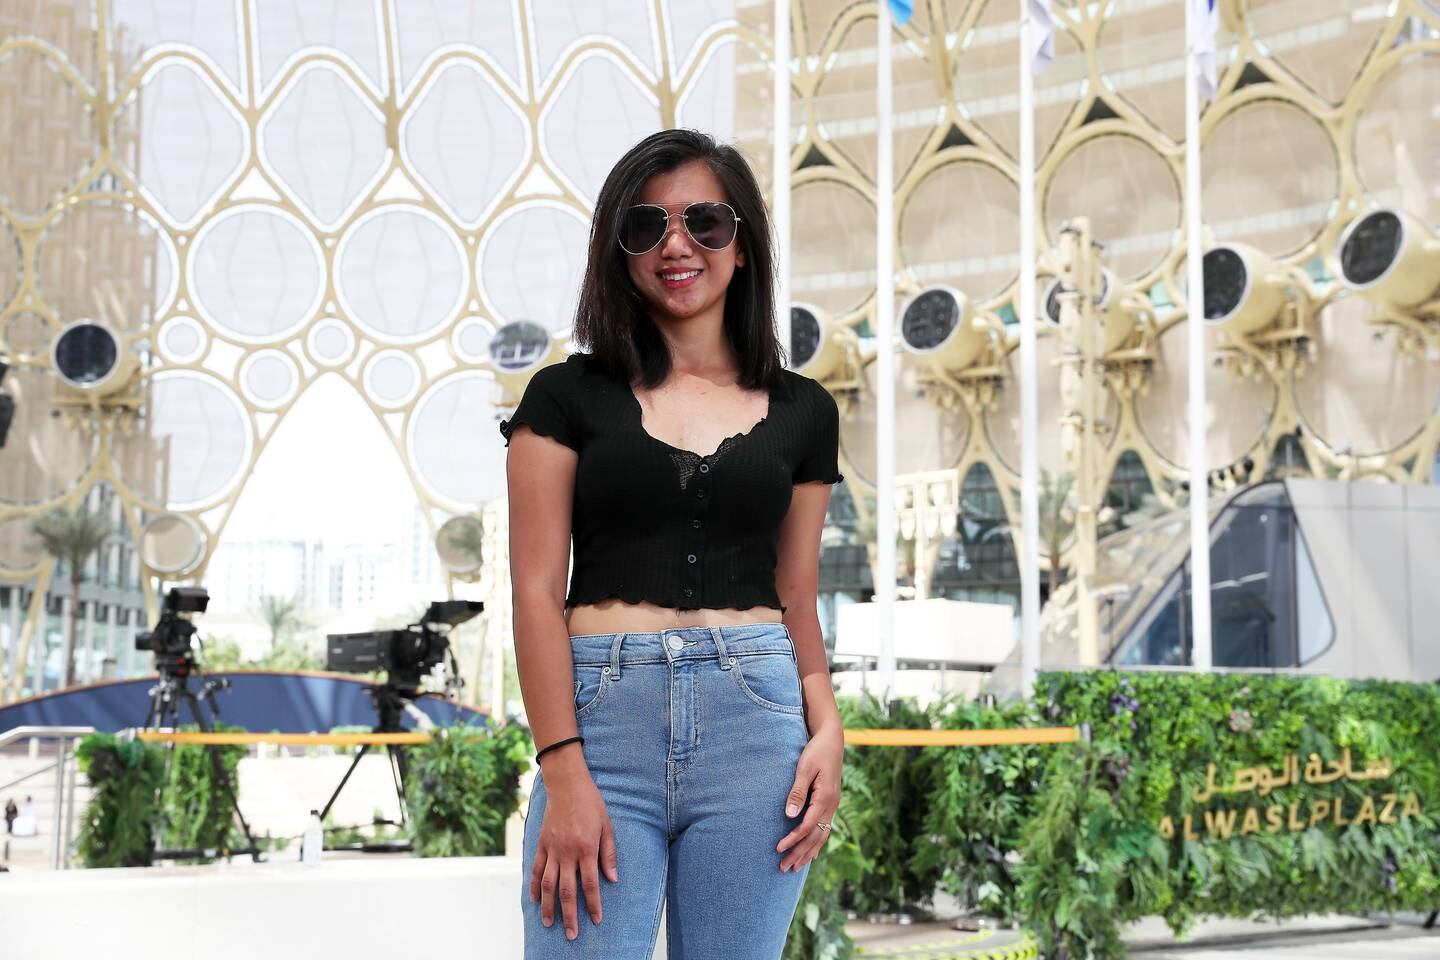 Ivy Soliven from the Philippines has visited the Expo five times. Pawan Singh / The National    